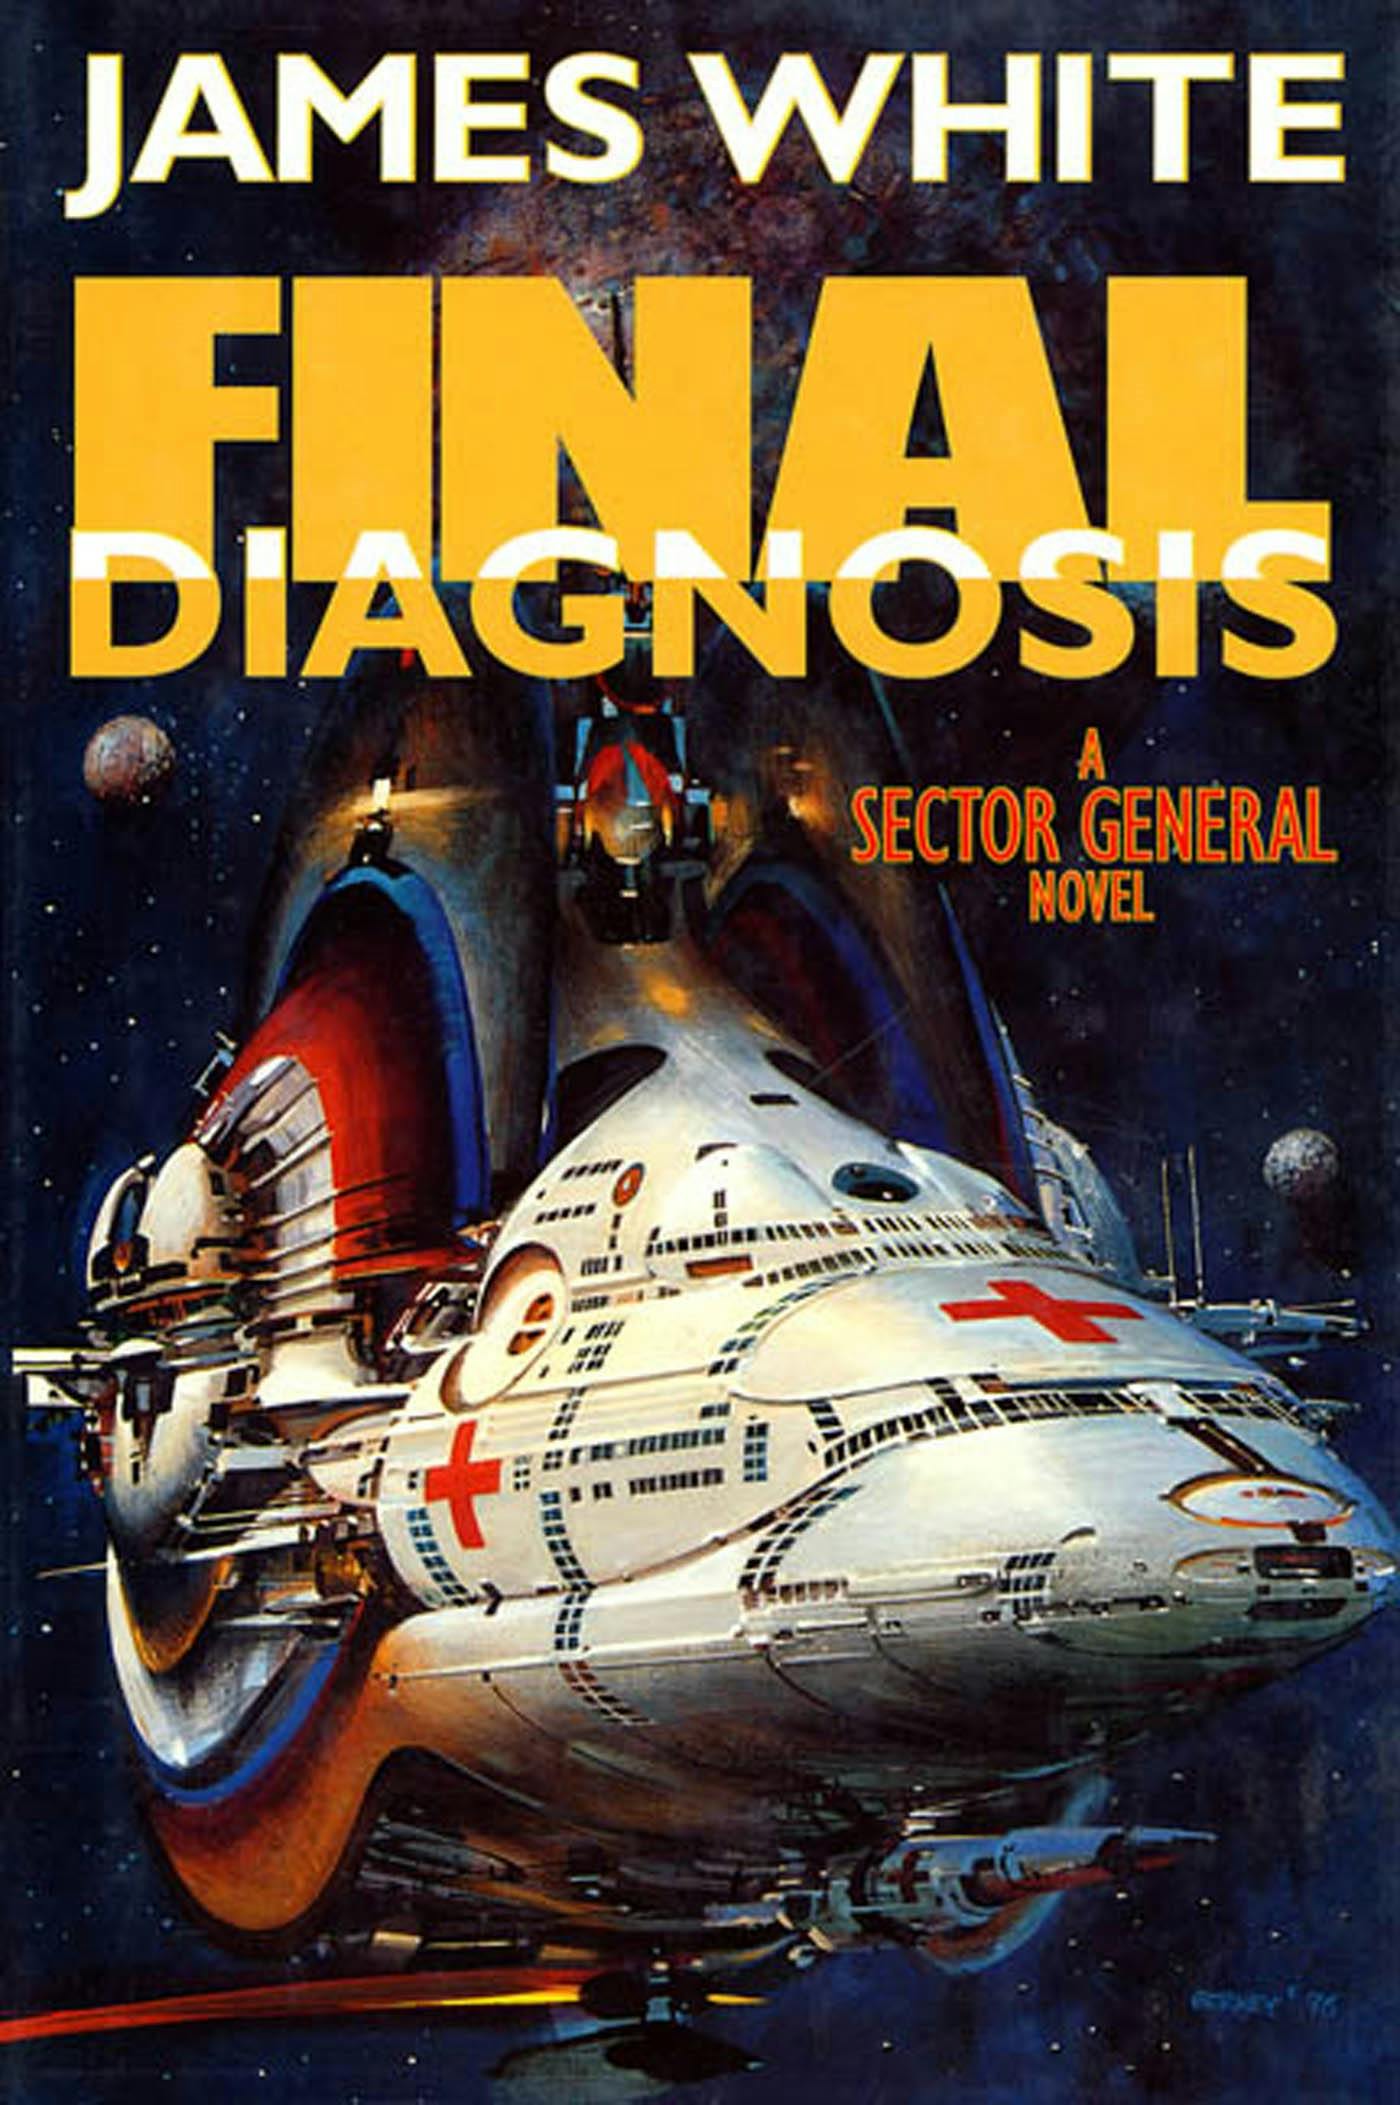 Cover for the book titled as: Final Diagnosis